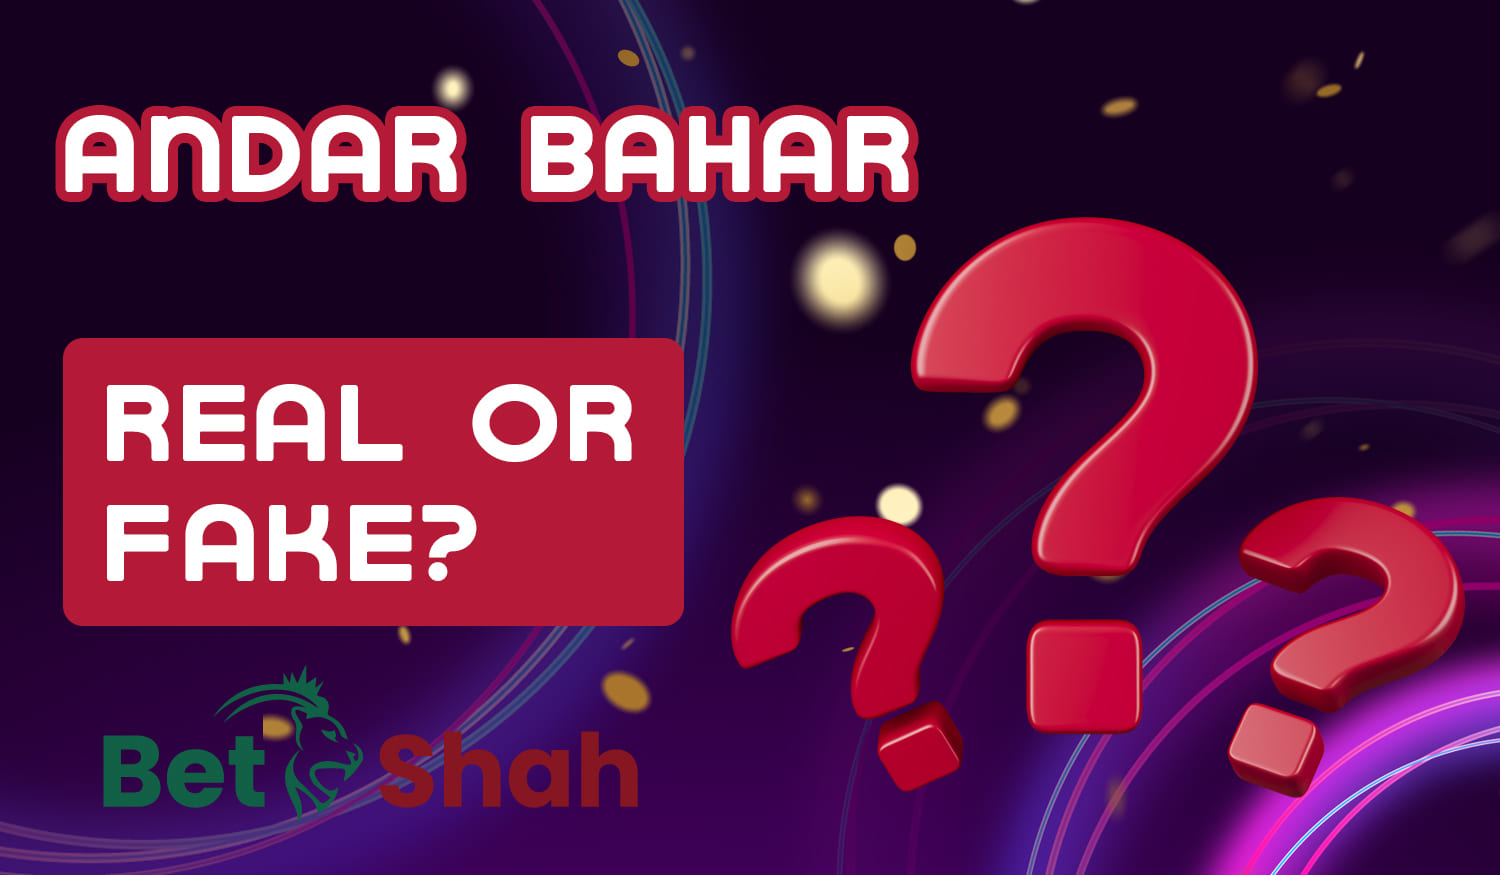 How safe is it for Indian users to play Andar Bahar on BetShah